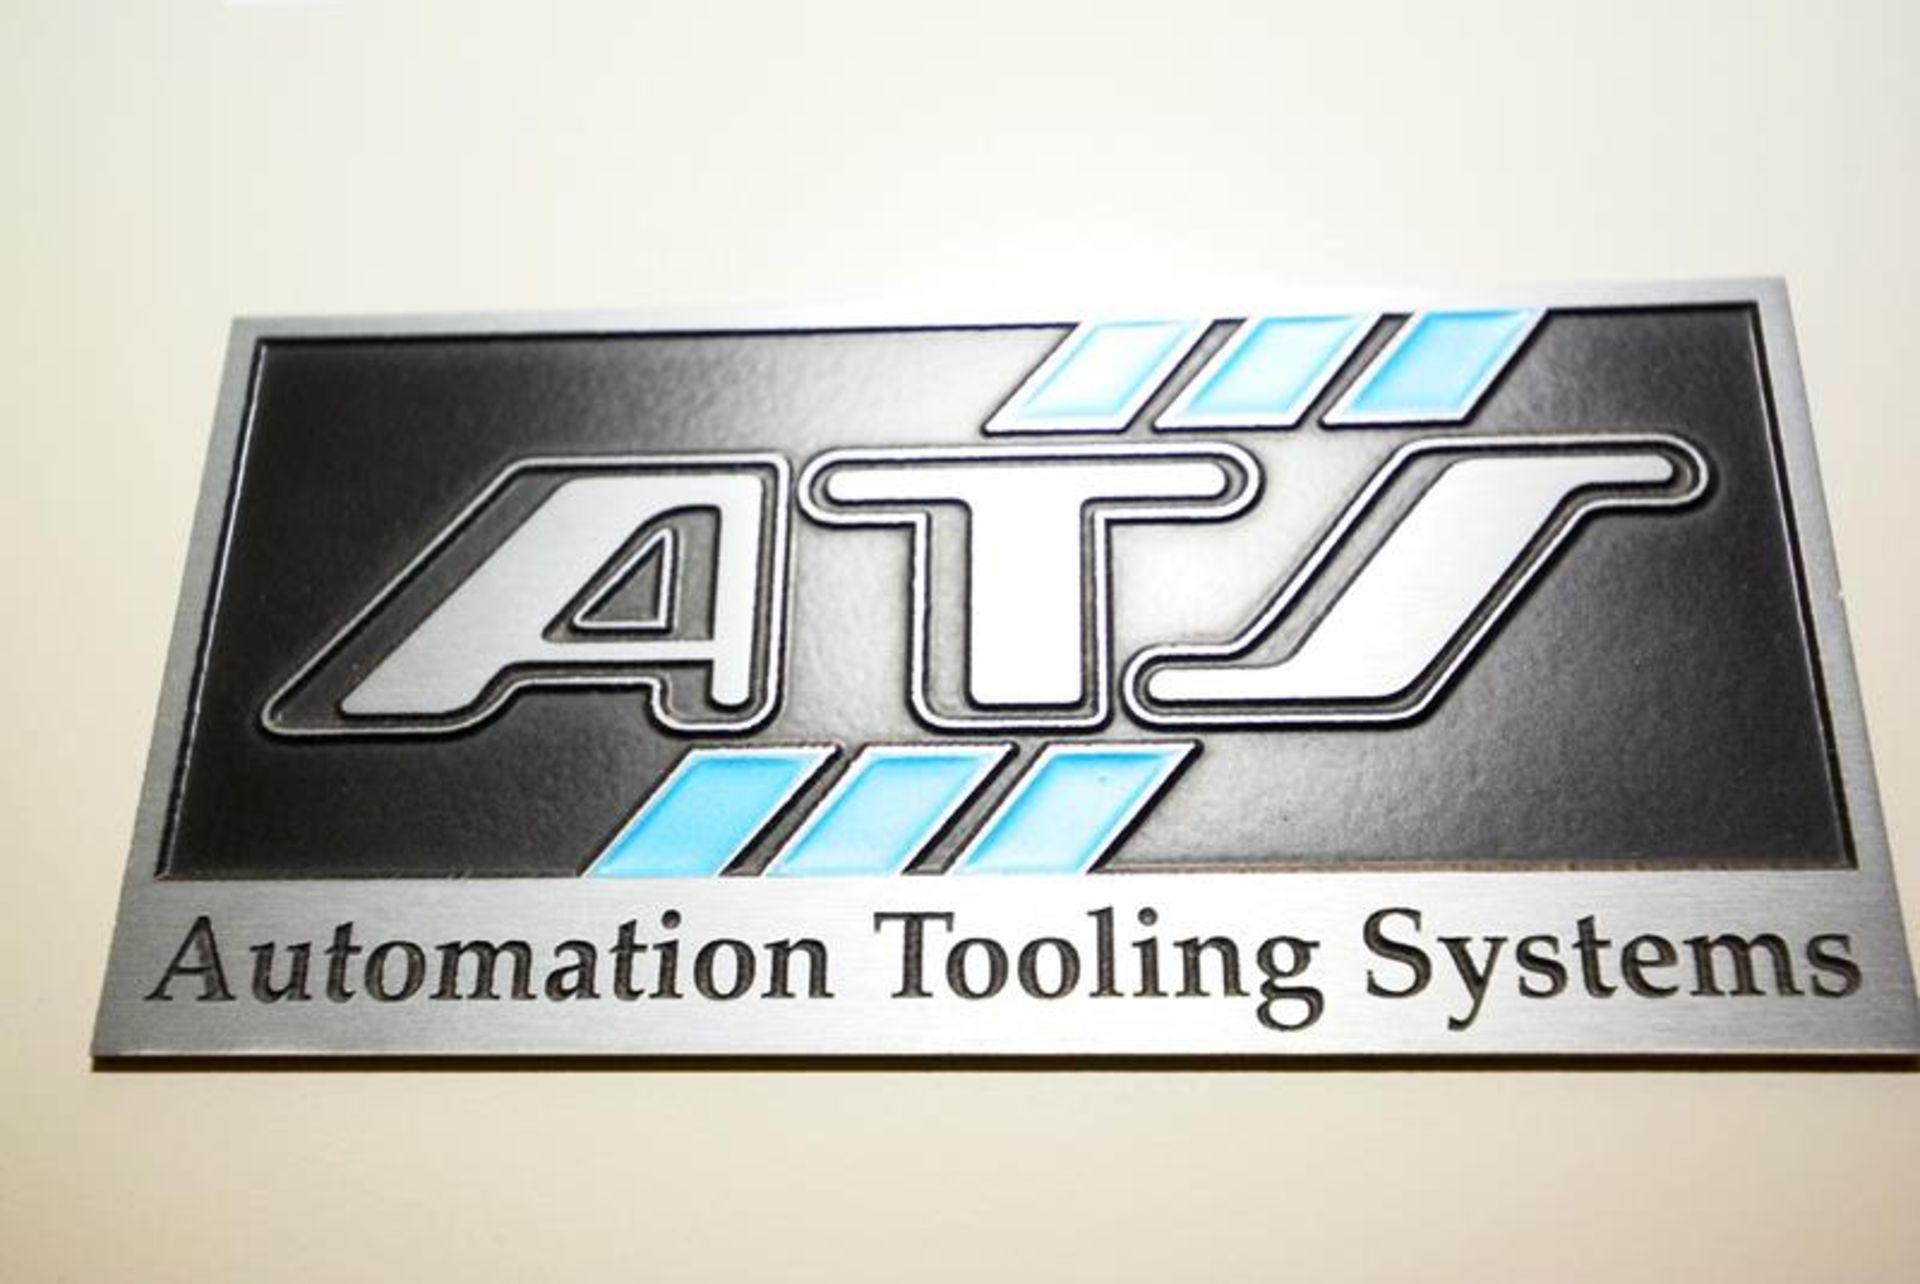 Equipment: Station 050, Assembly of components. Brand: ATS. Model: N/A. Year: N/A. Serial Number: - Image 11 of 14